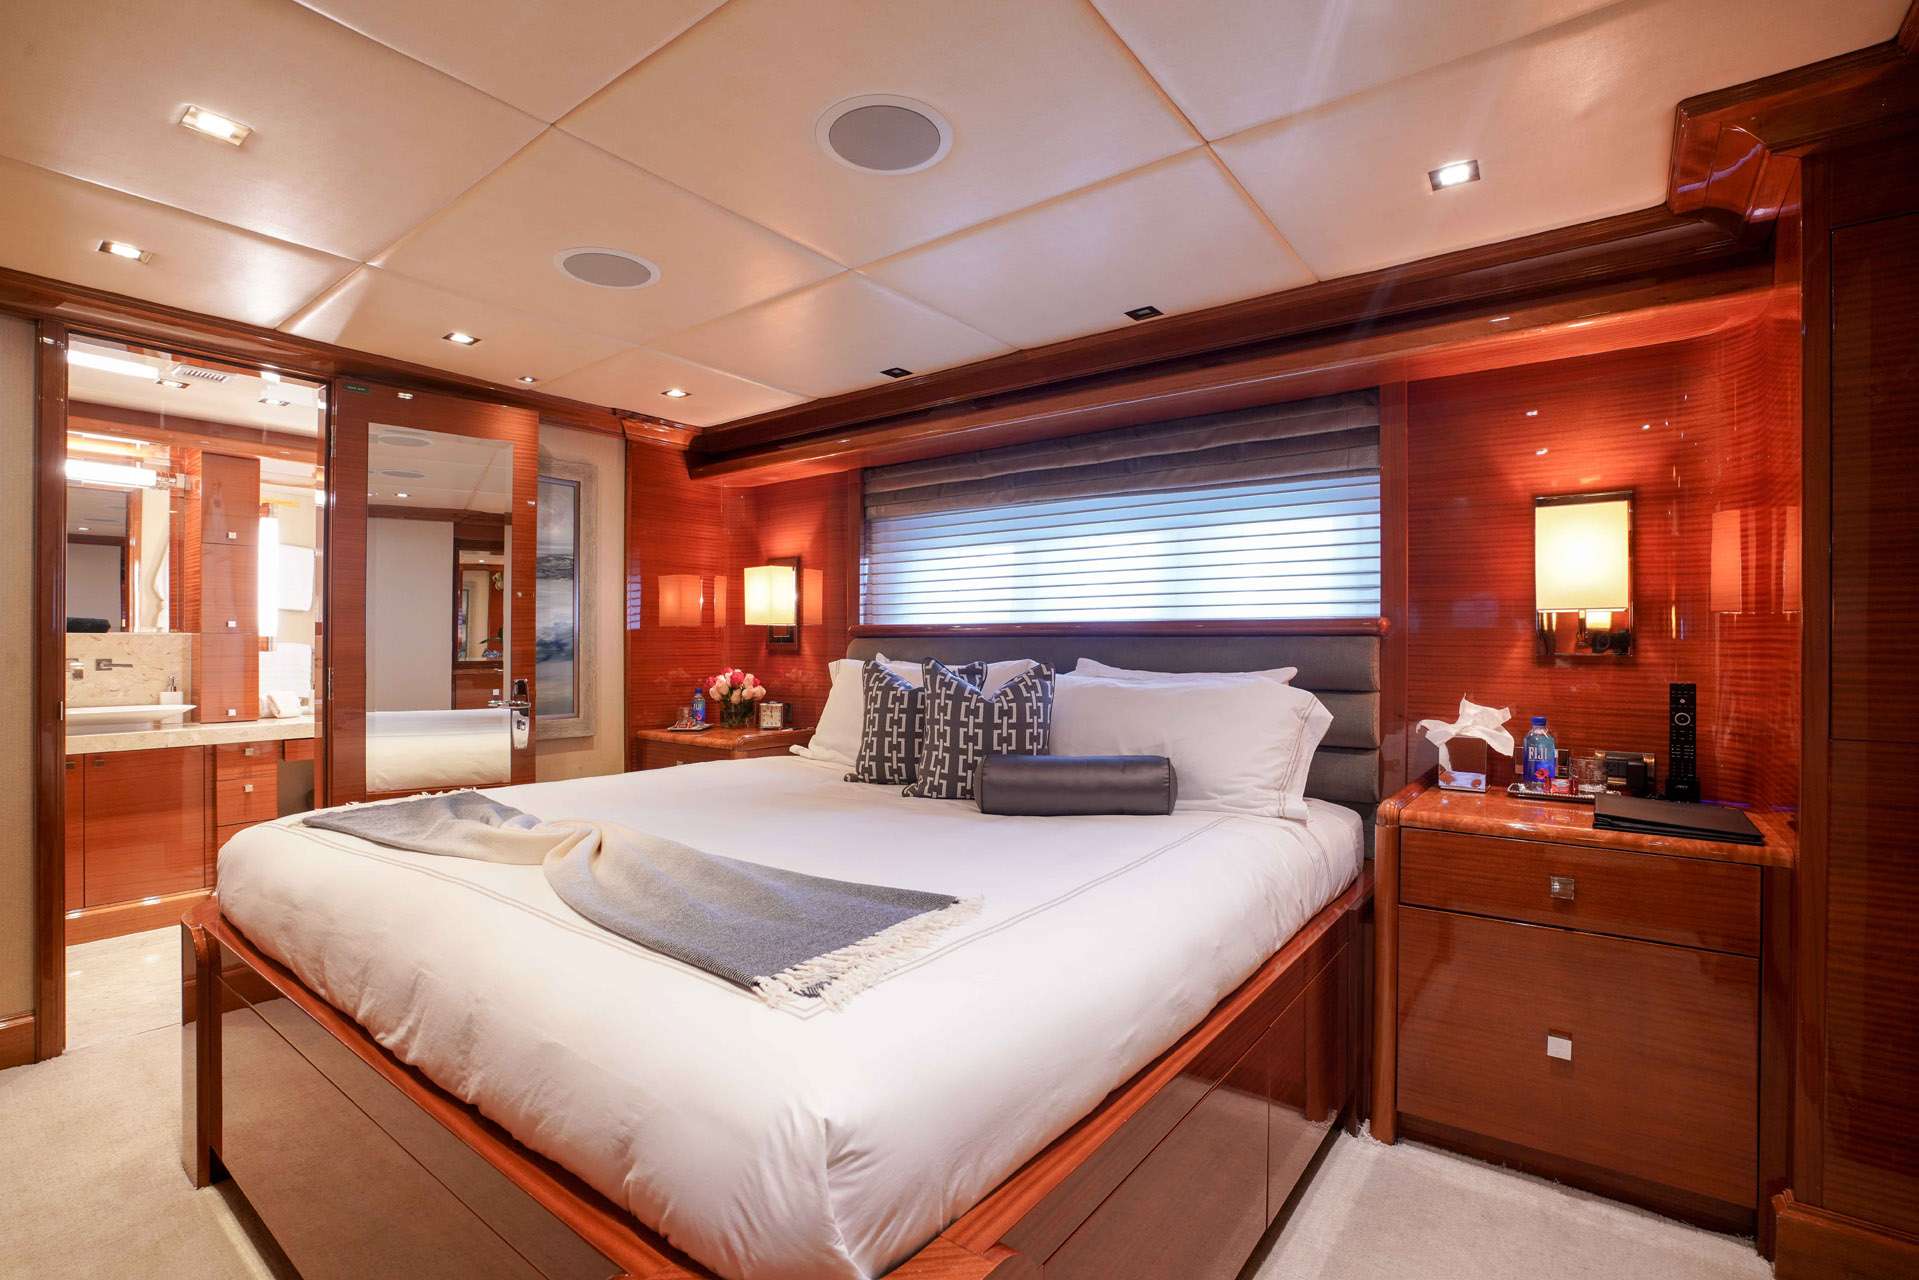 Motor Yacht 'ASPEN ALTERNATIVE' Guest Stateroom, 10 PAX, 9 Crew, 164.00 Ft, 50.00 Meters, Built 2010, Trinity Yachts, Refit Year 2022